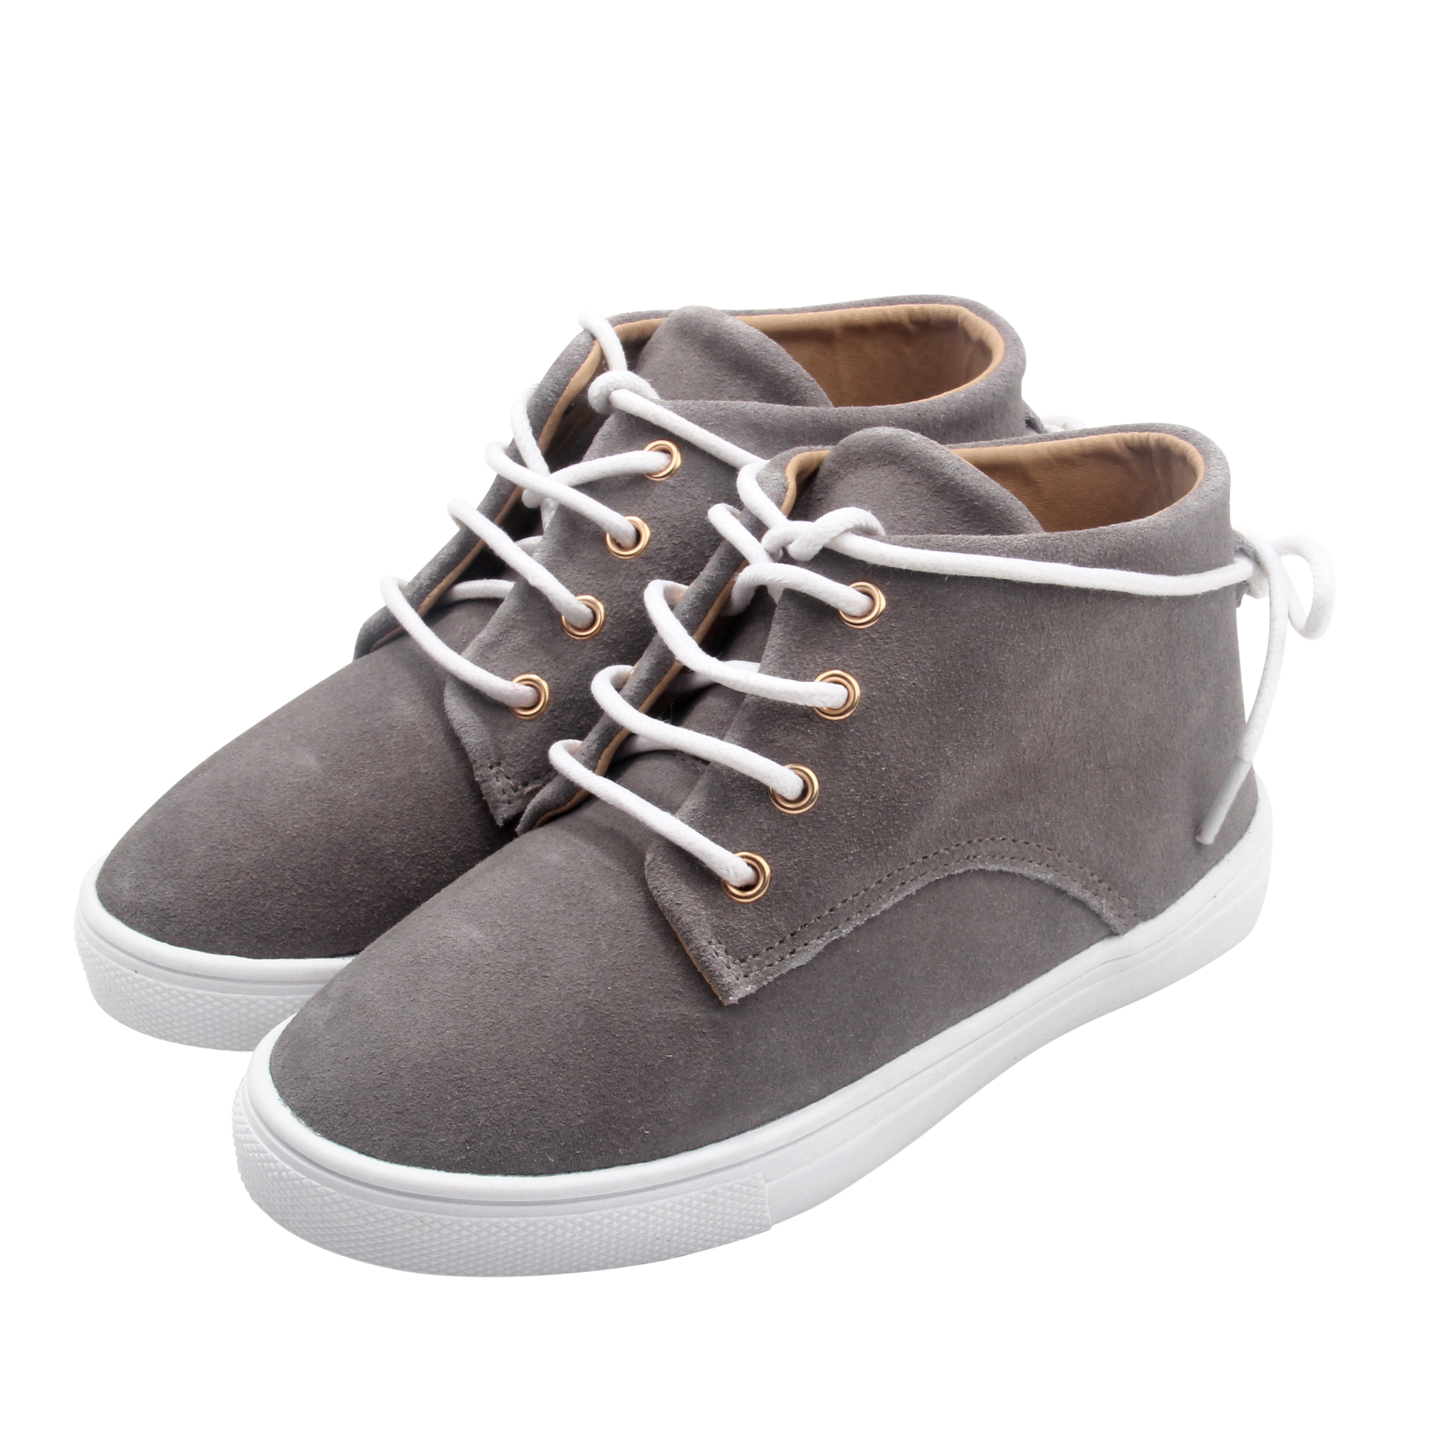 WILD CHASE - Grey | Gelato Suede Leather Sneaker